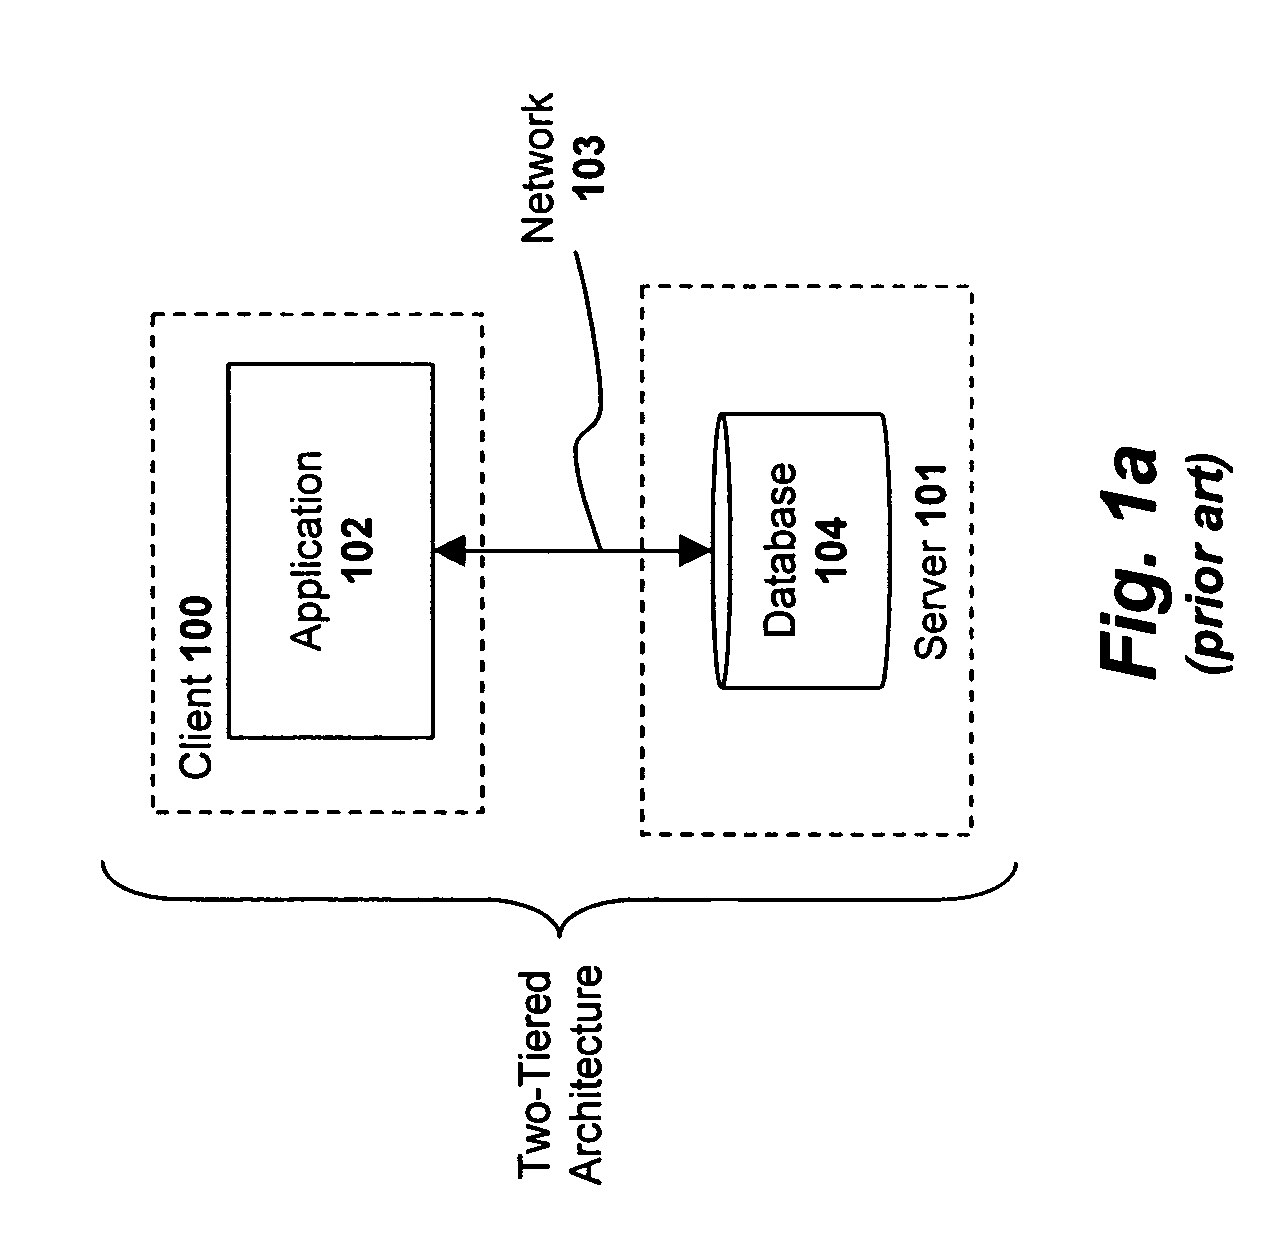 Session management within a multi-tiered enterprise network